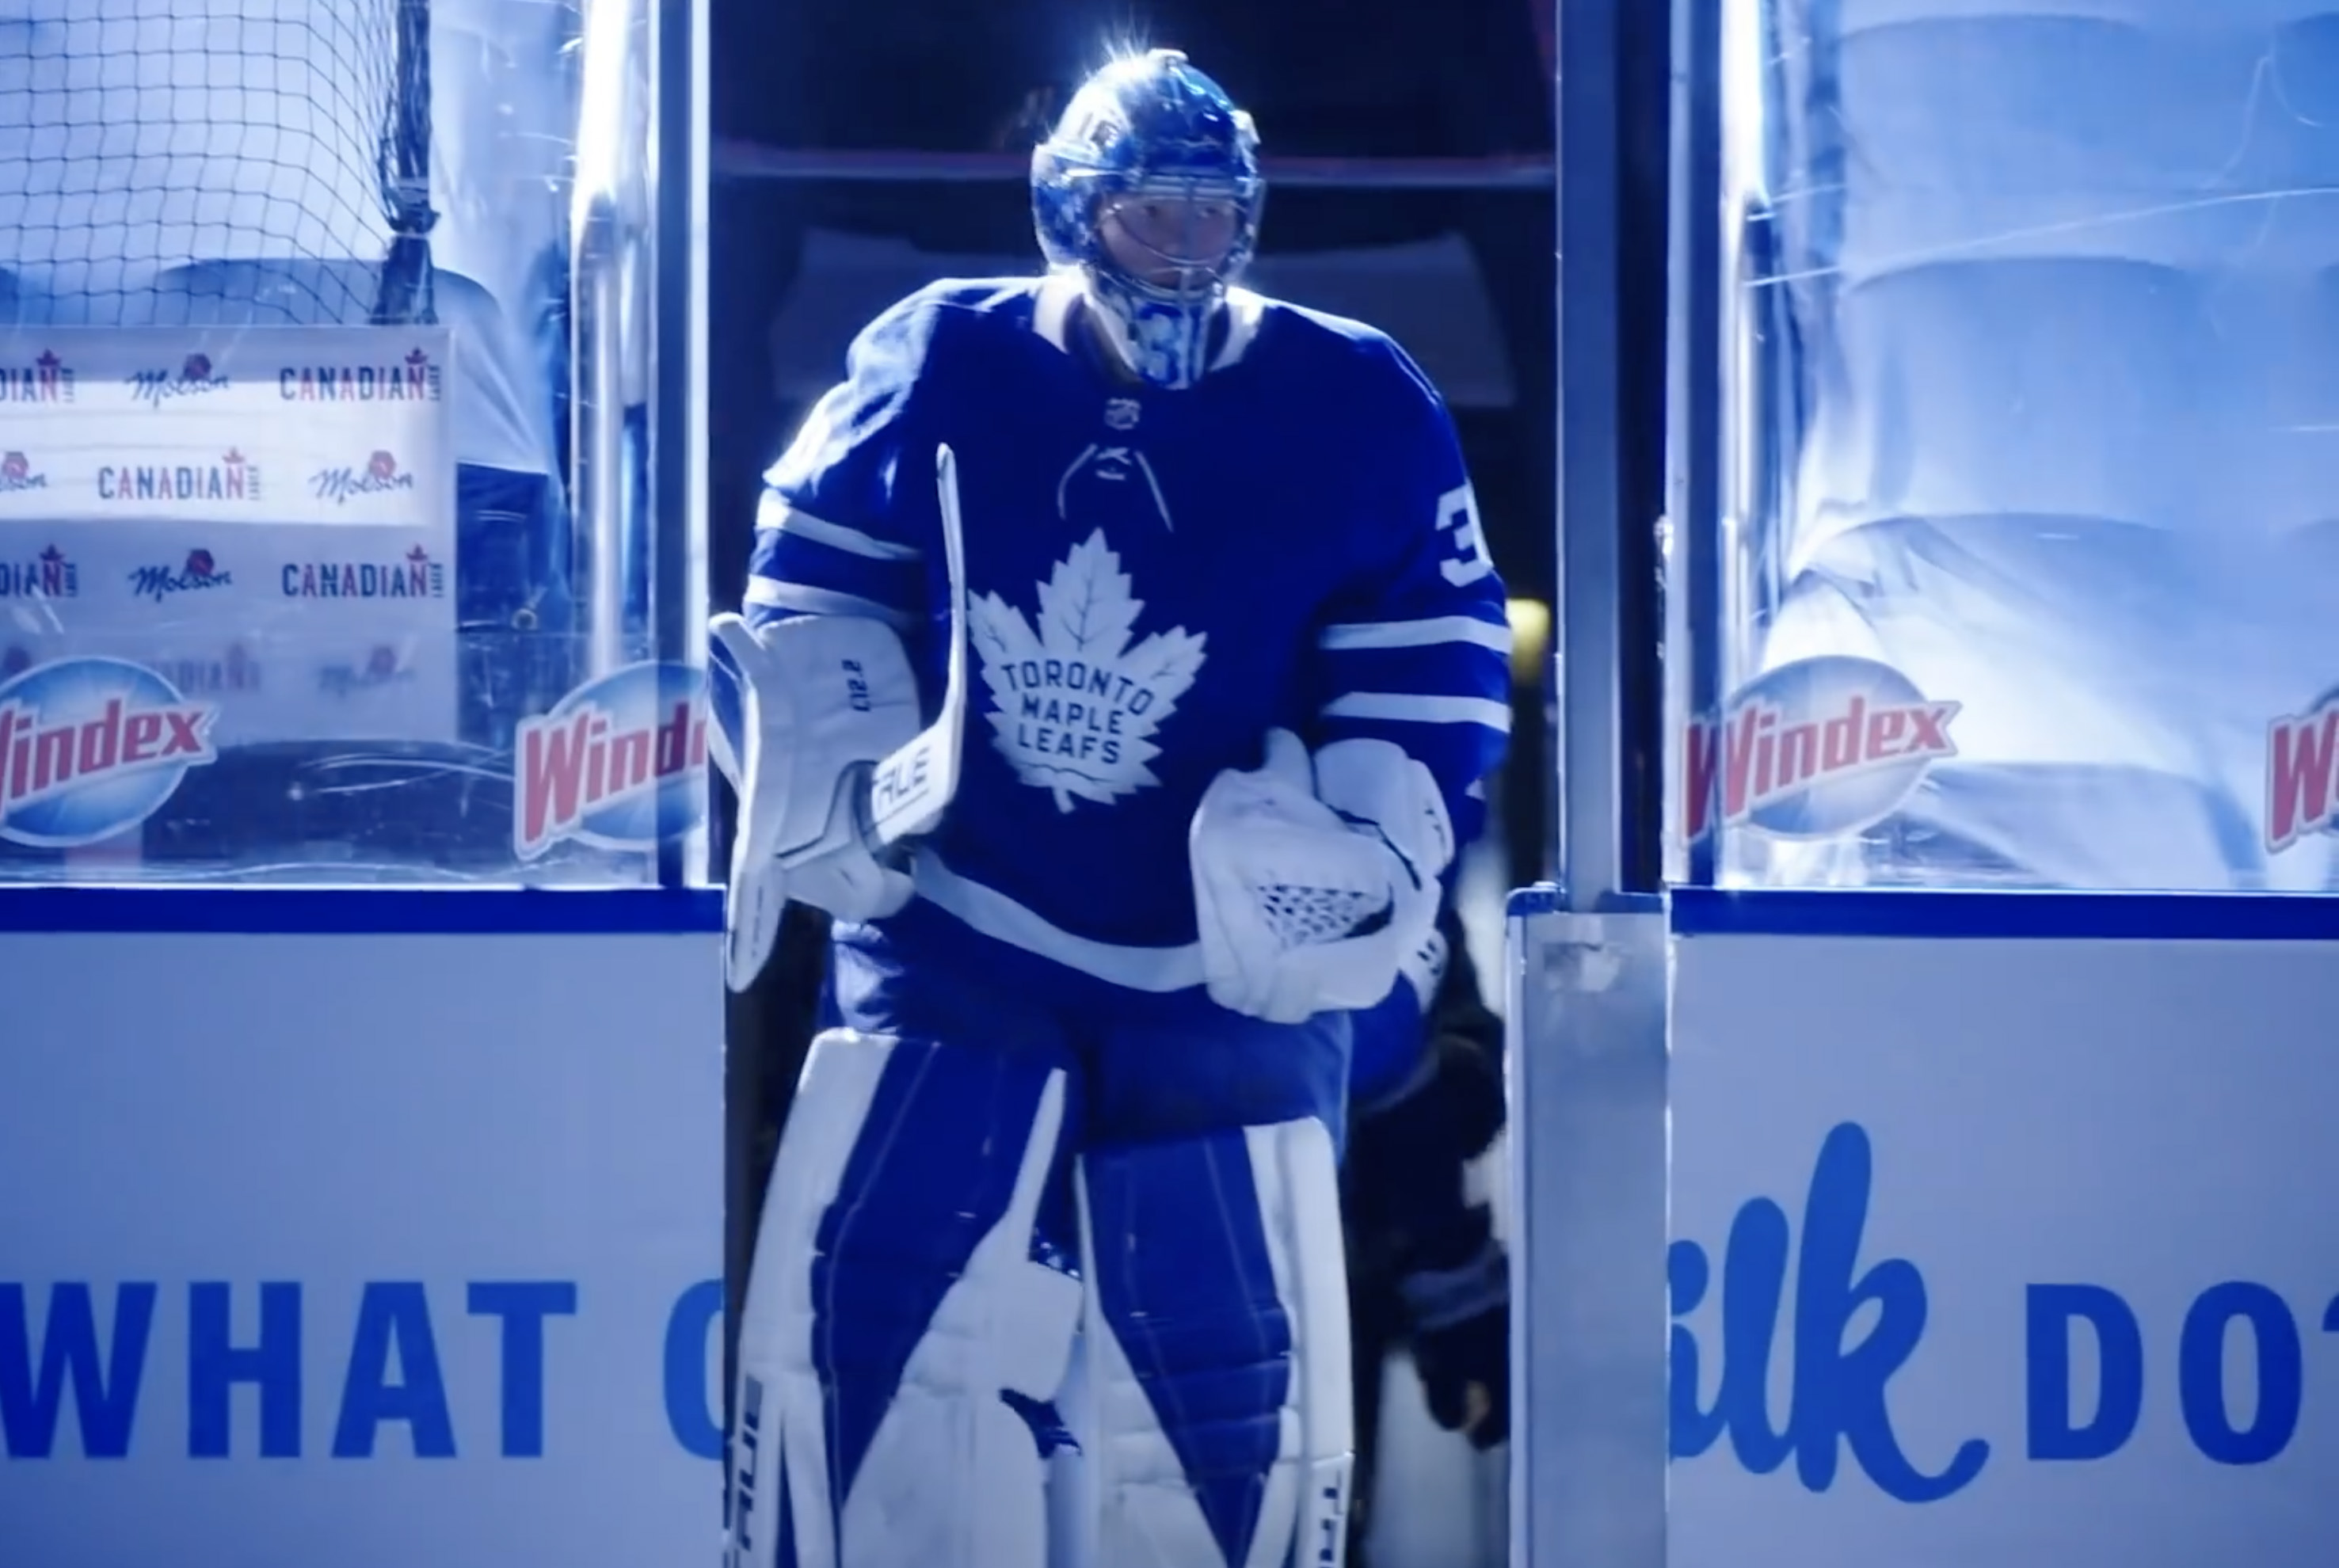 Of course Leafs fans will watch the All or Nothing doc series